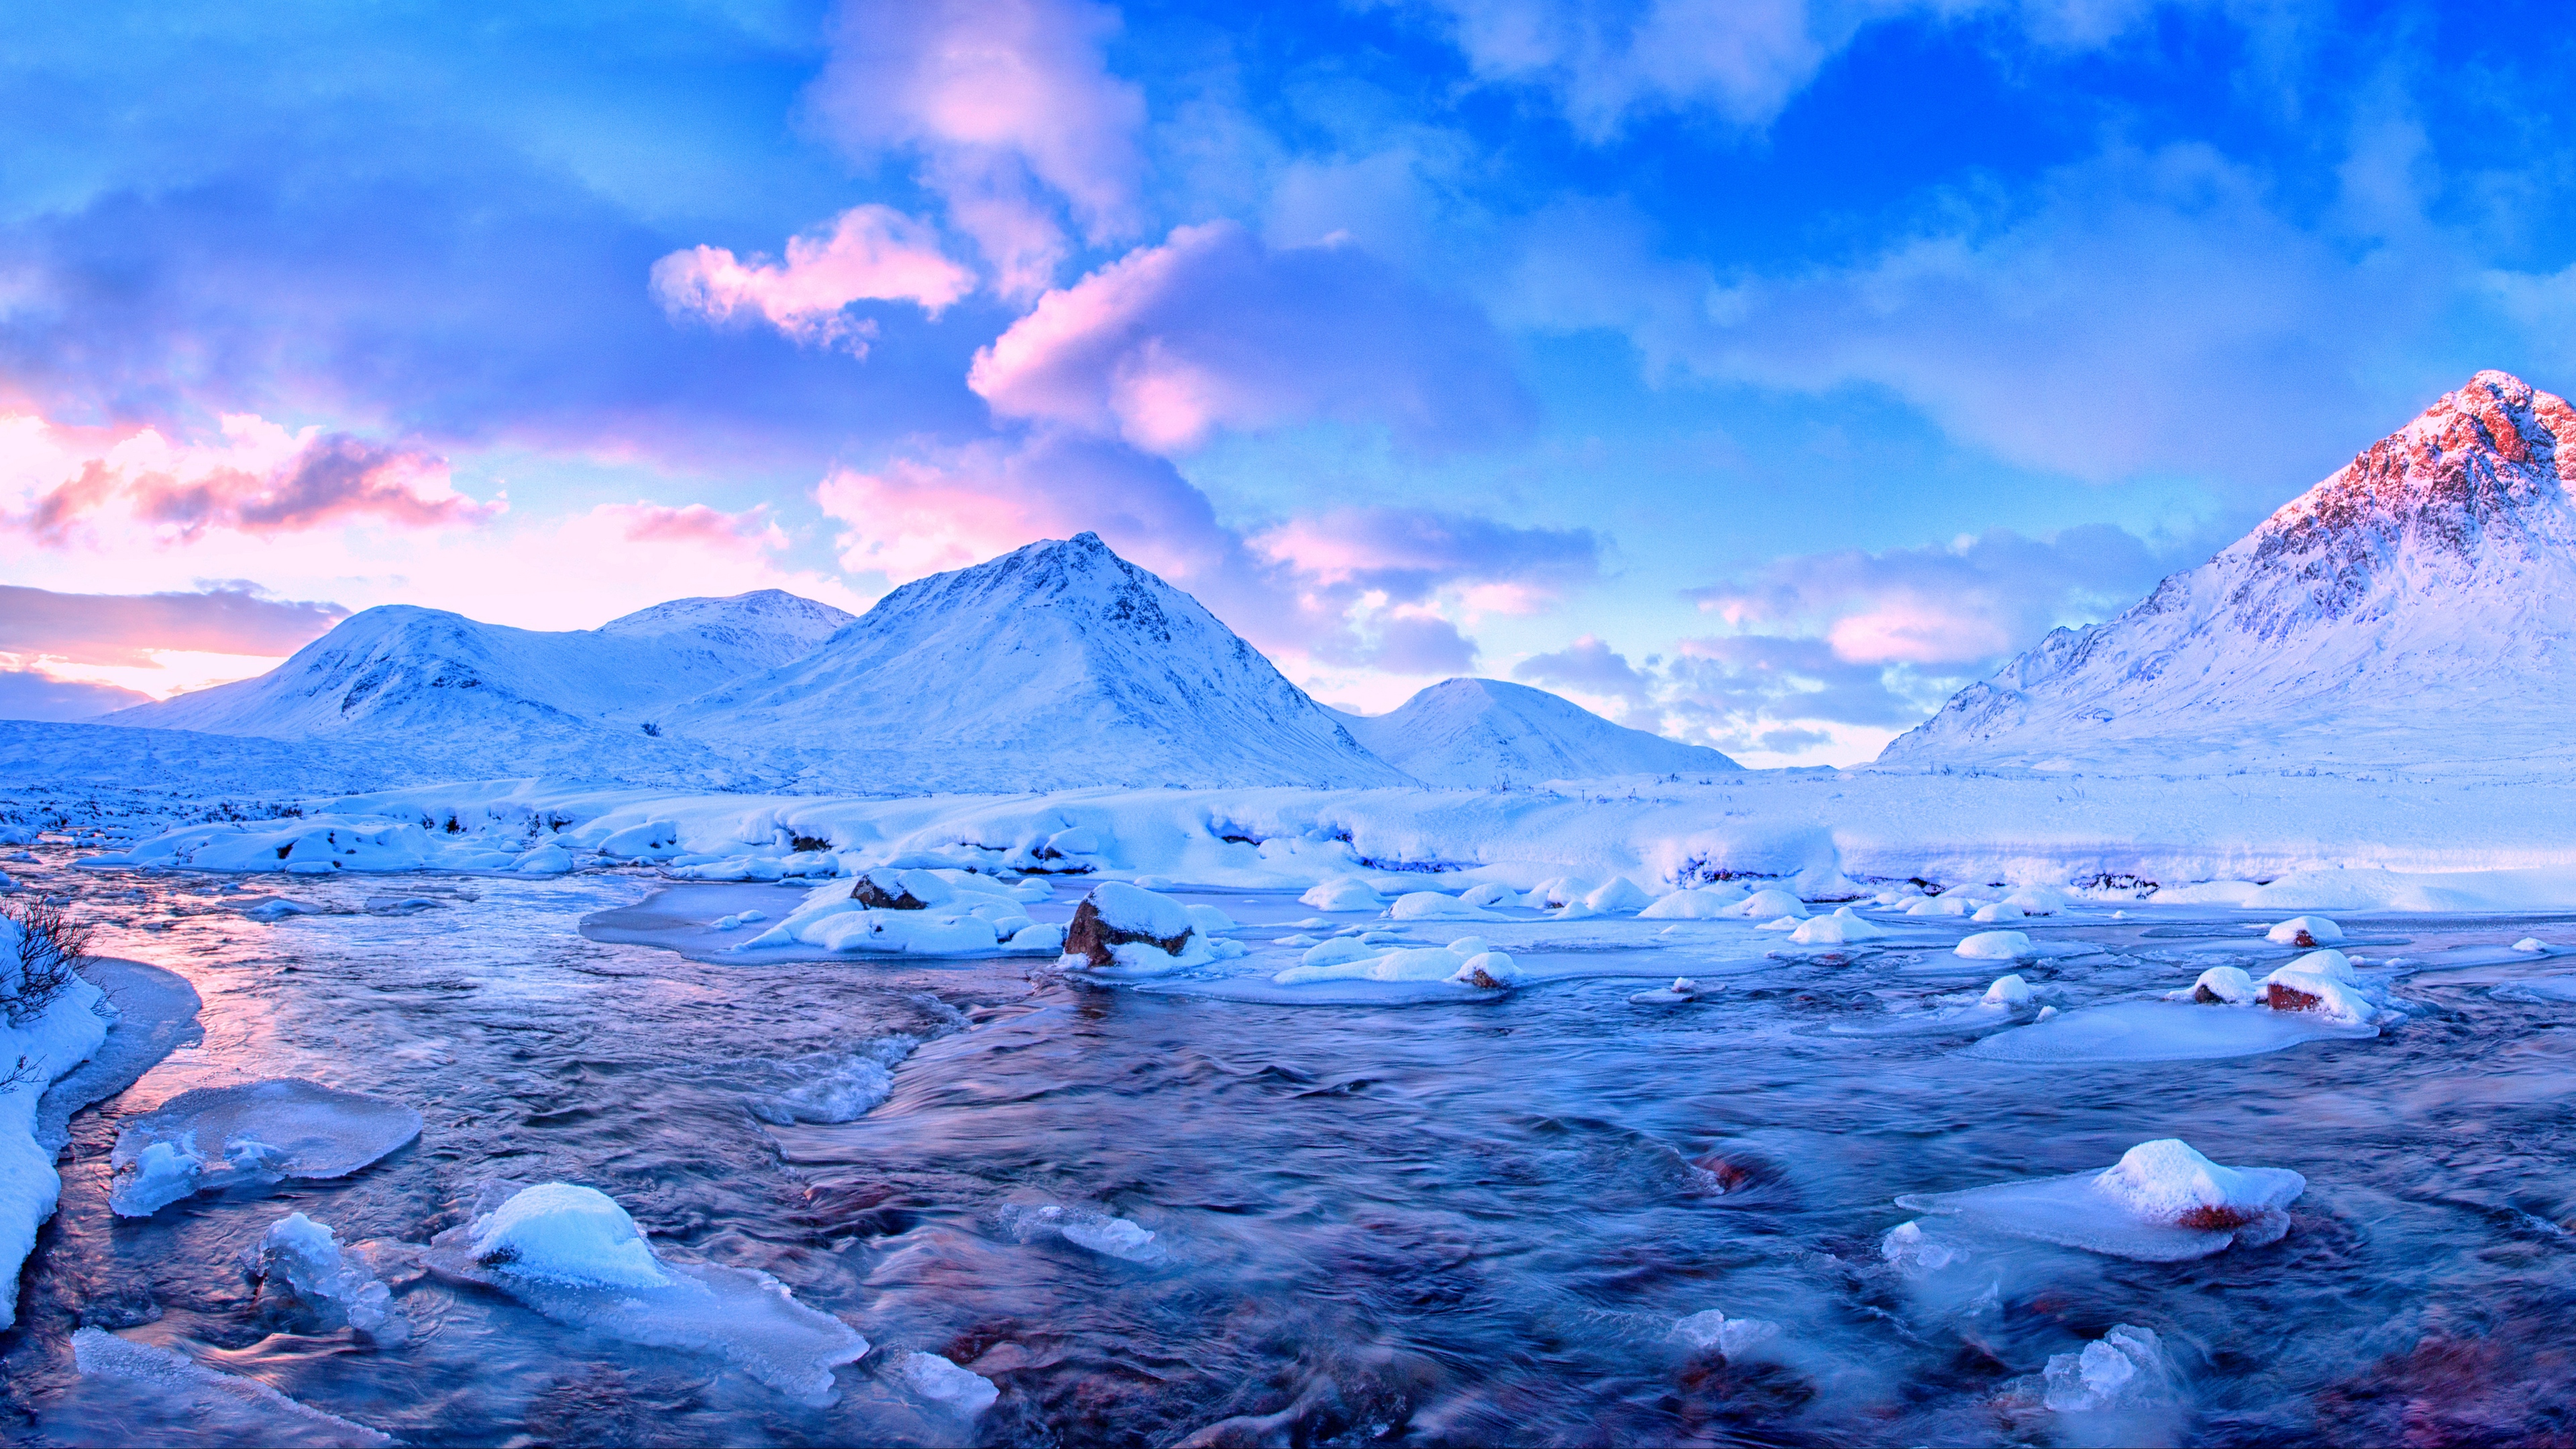 General 3840x2160 snow mountains clouds ice river water sunlight sunset nordic landscapes landscape